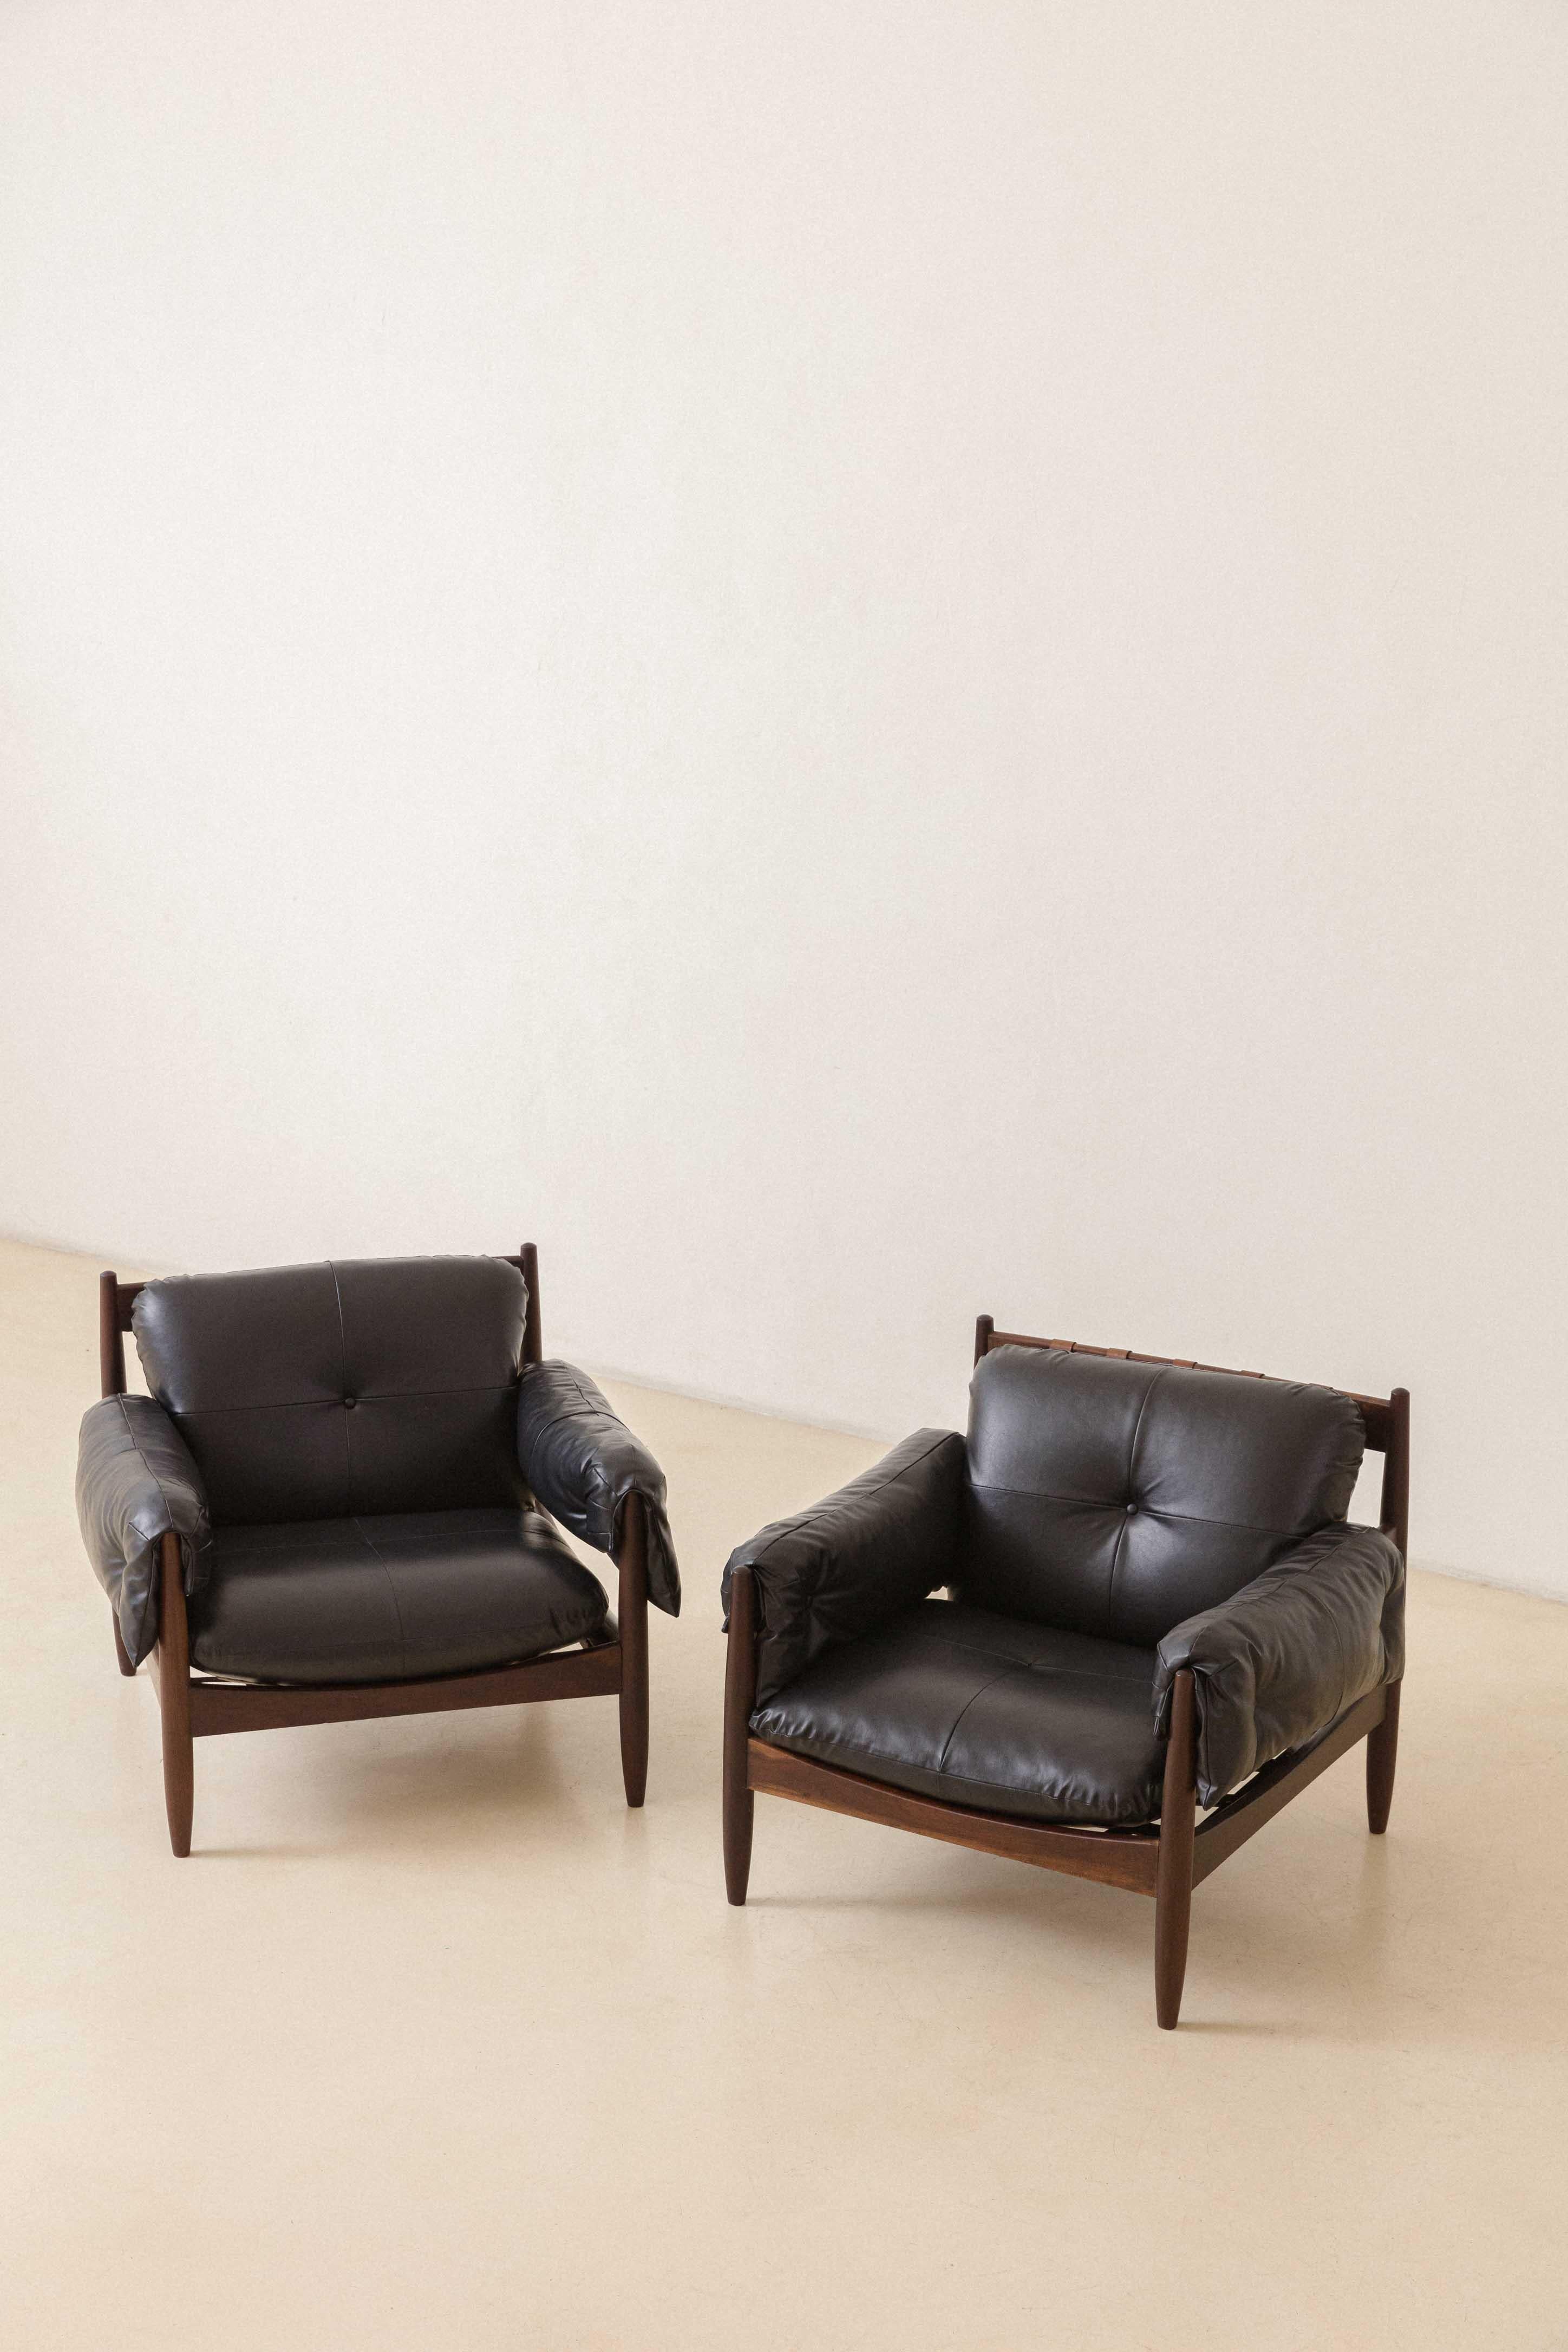 Brazilian Vintage Pair of Meia Pataca Rosewood Armchairs by Sergio Rodrigues, 1960, Brazil